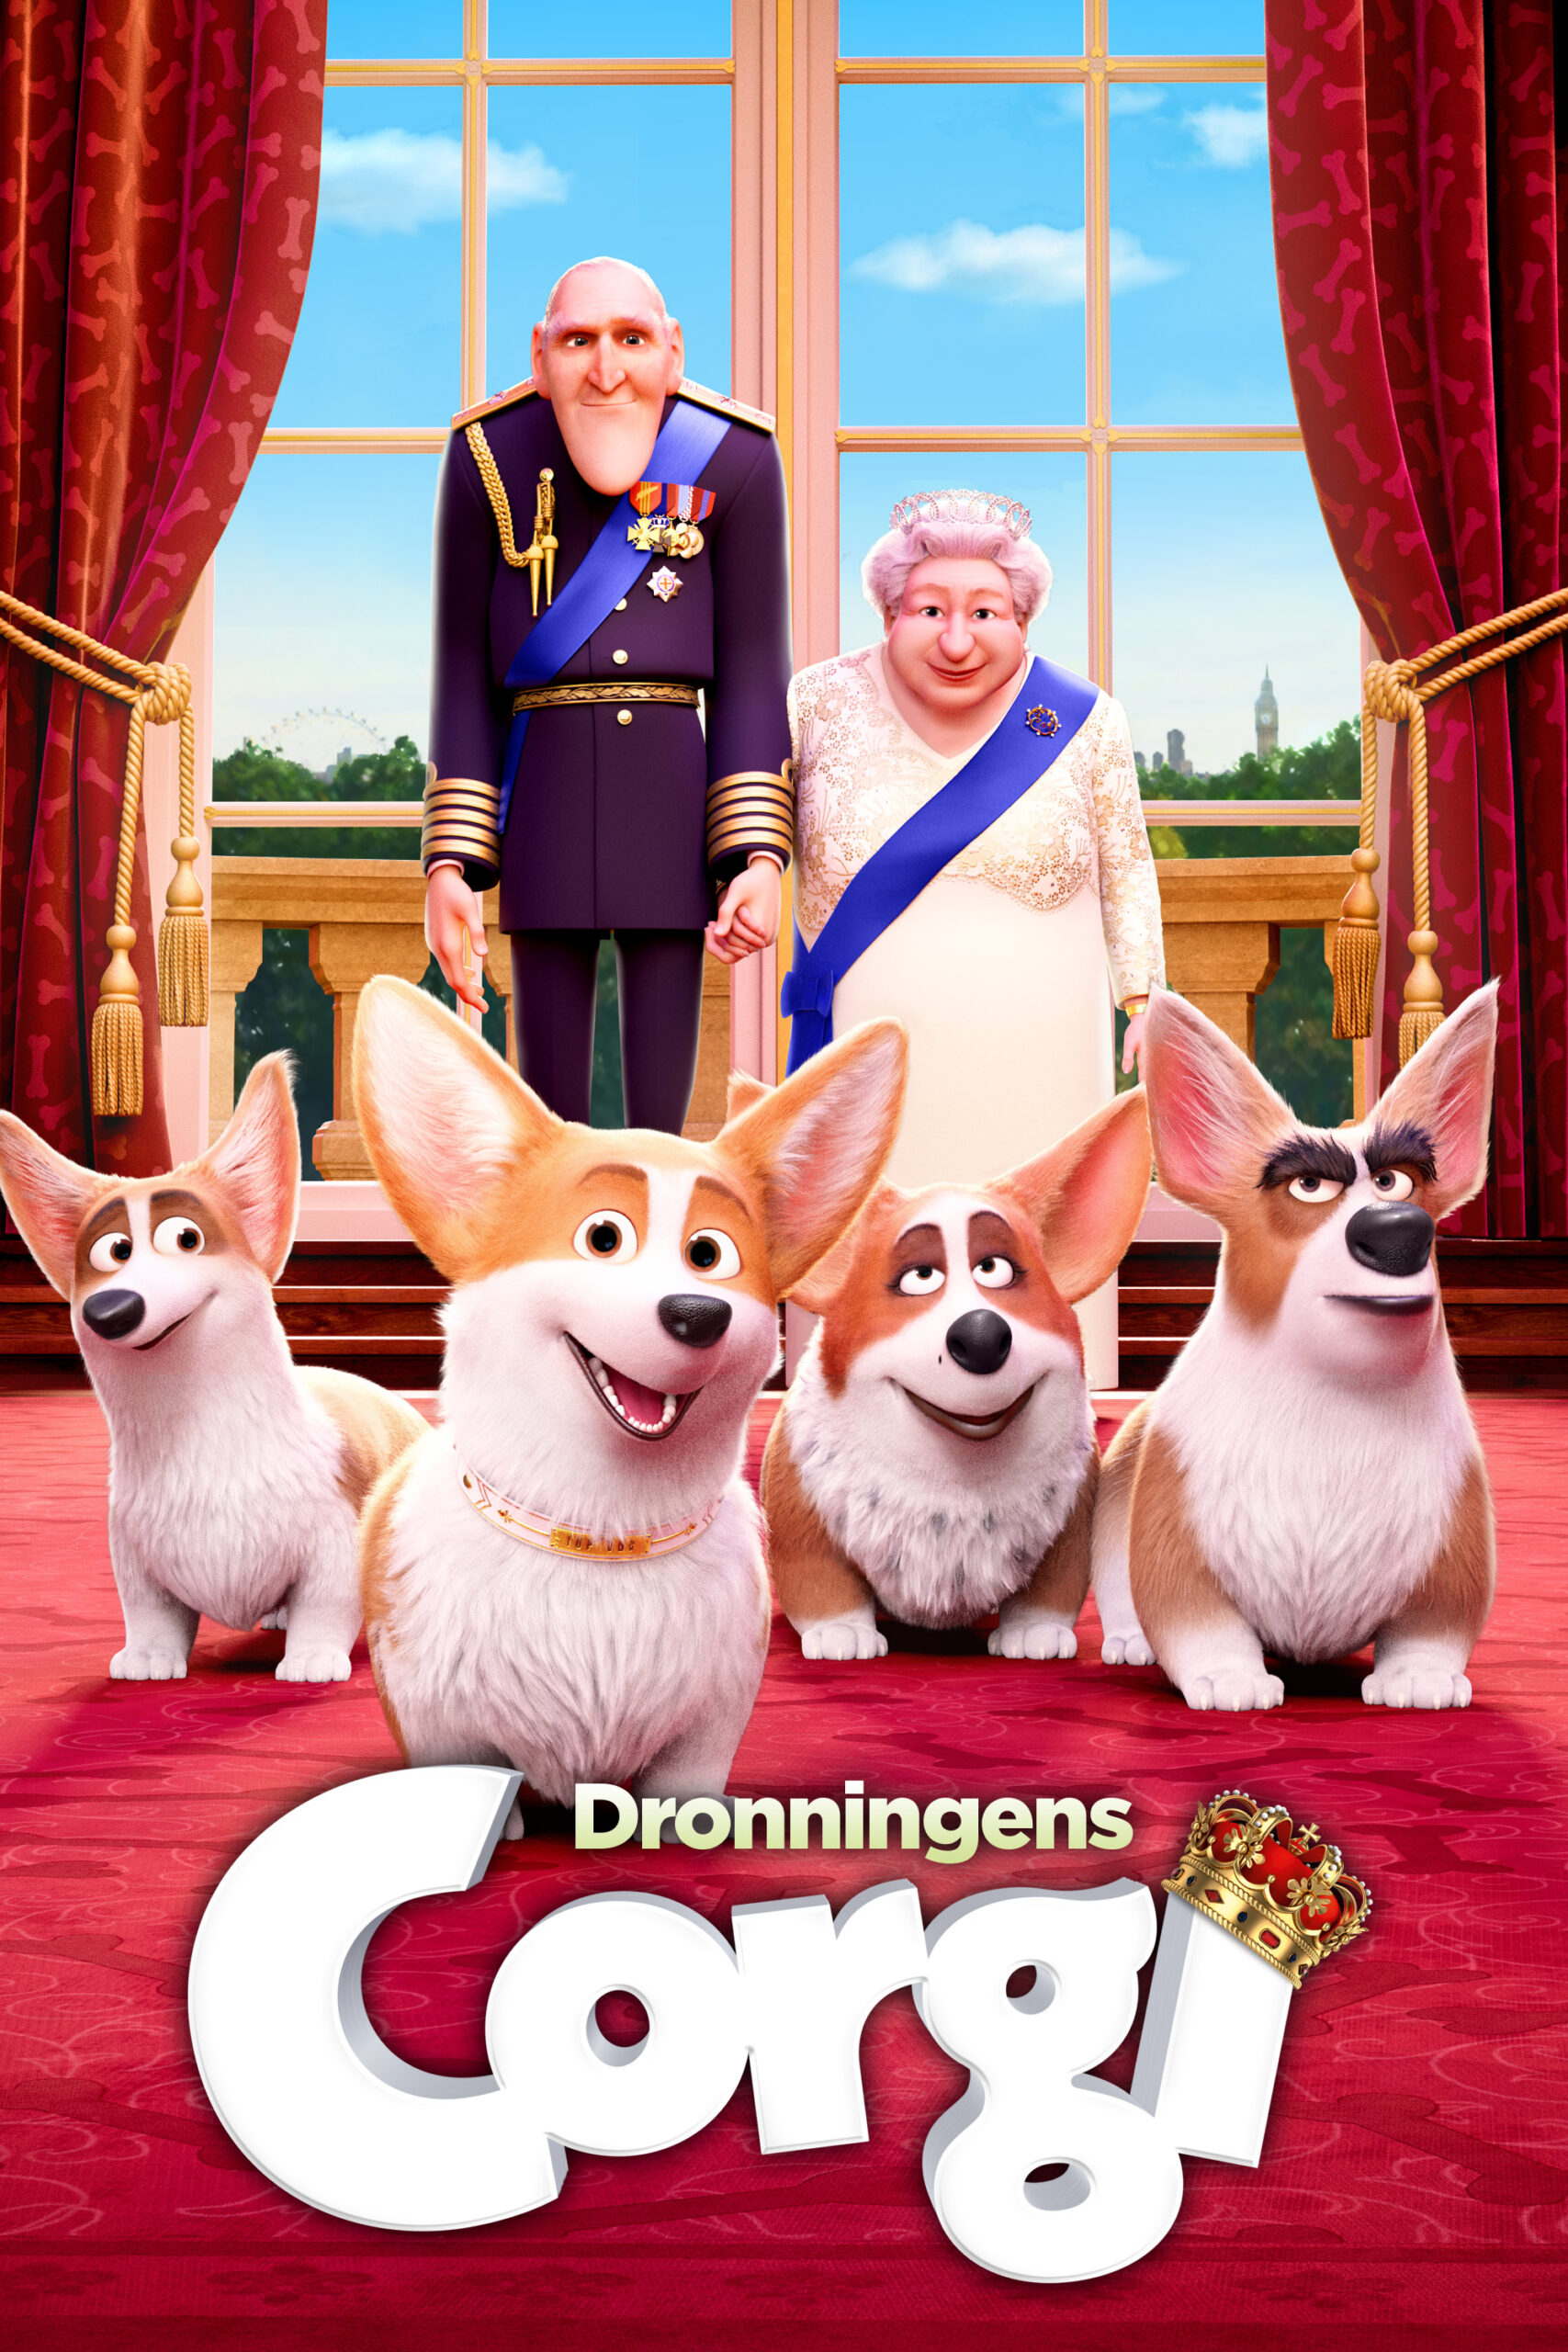 Read more about the article Dronningens Corgi